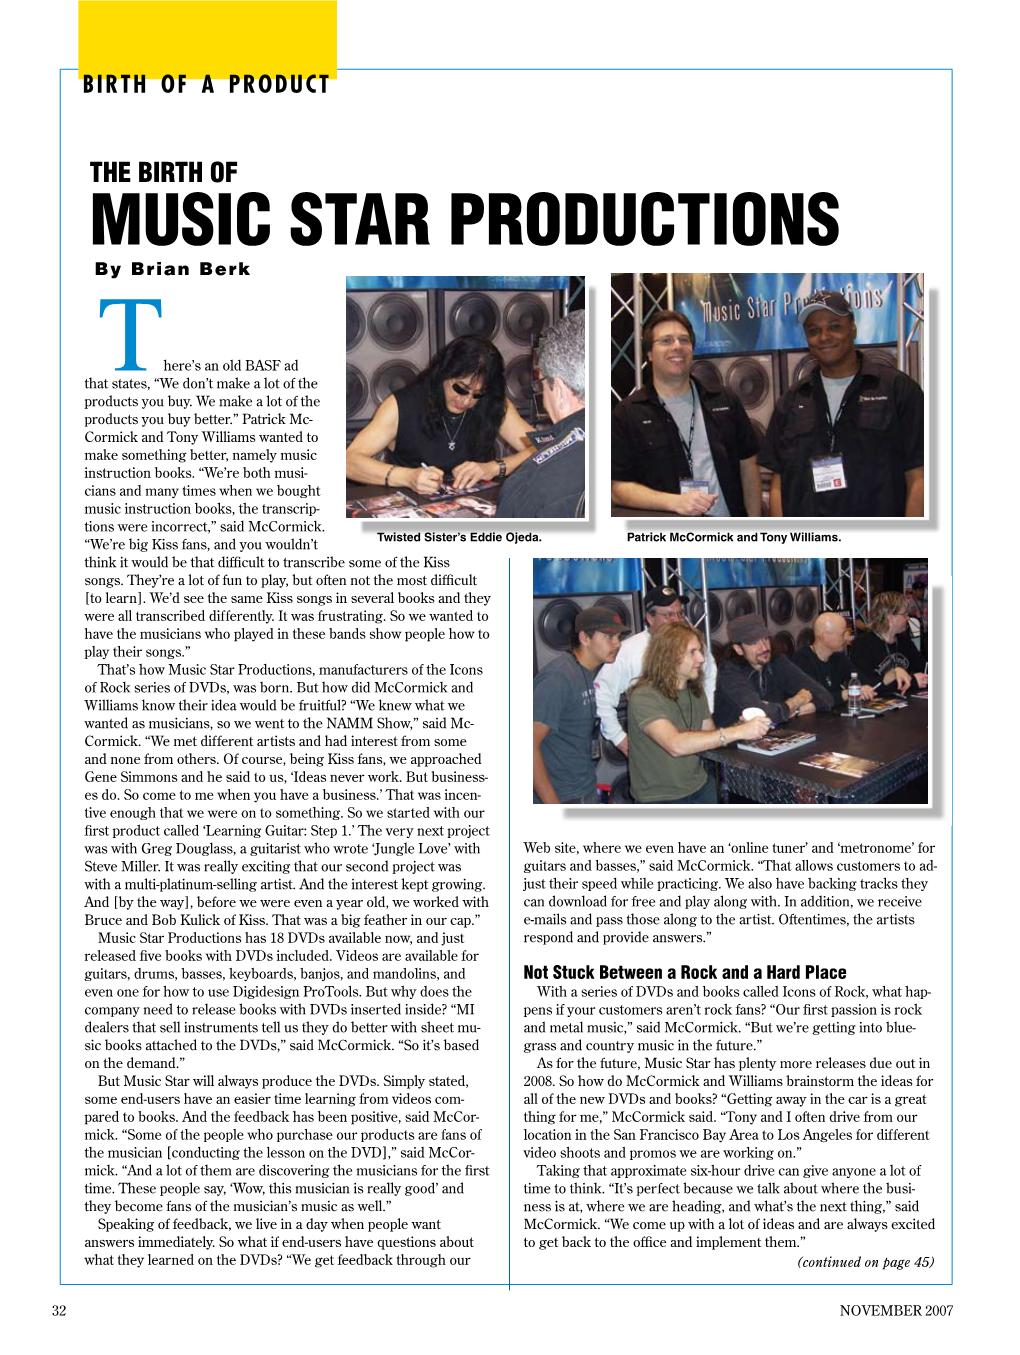 Music Star Productions by Brian Berk